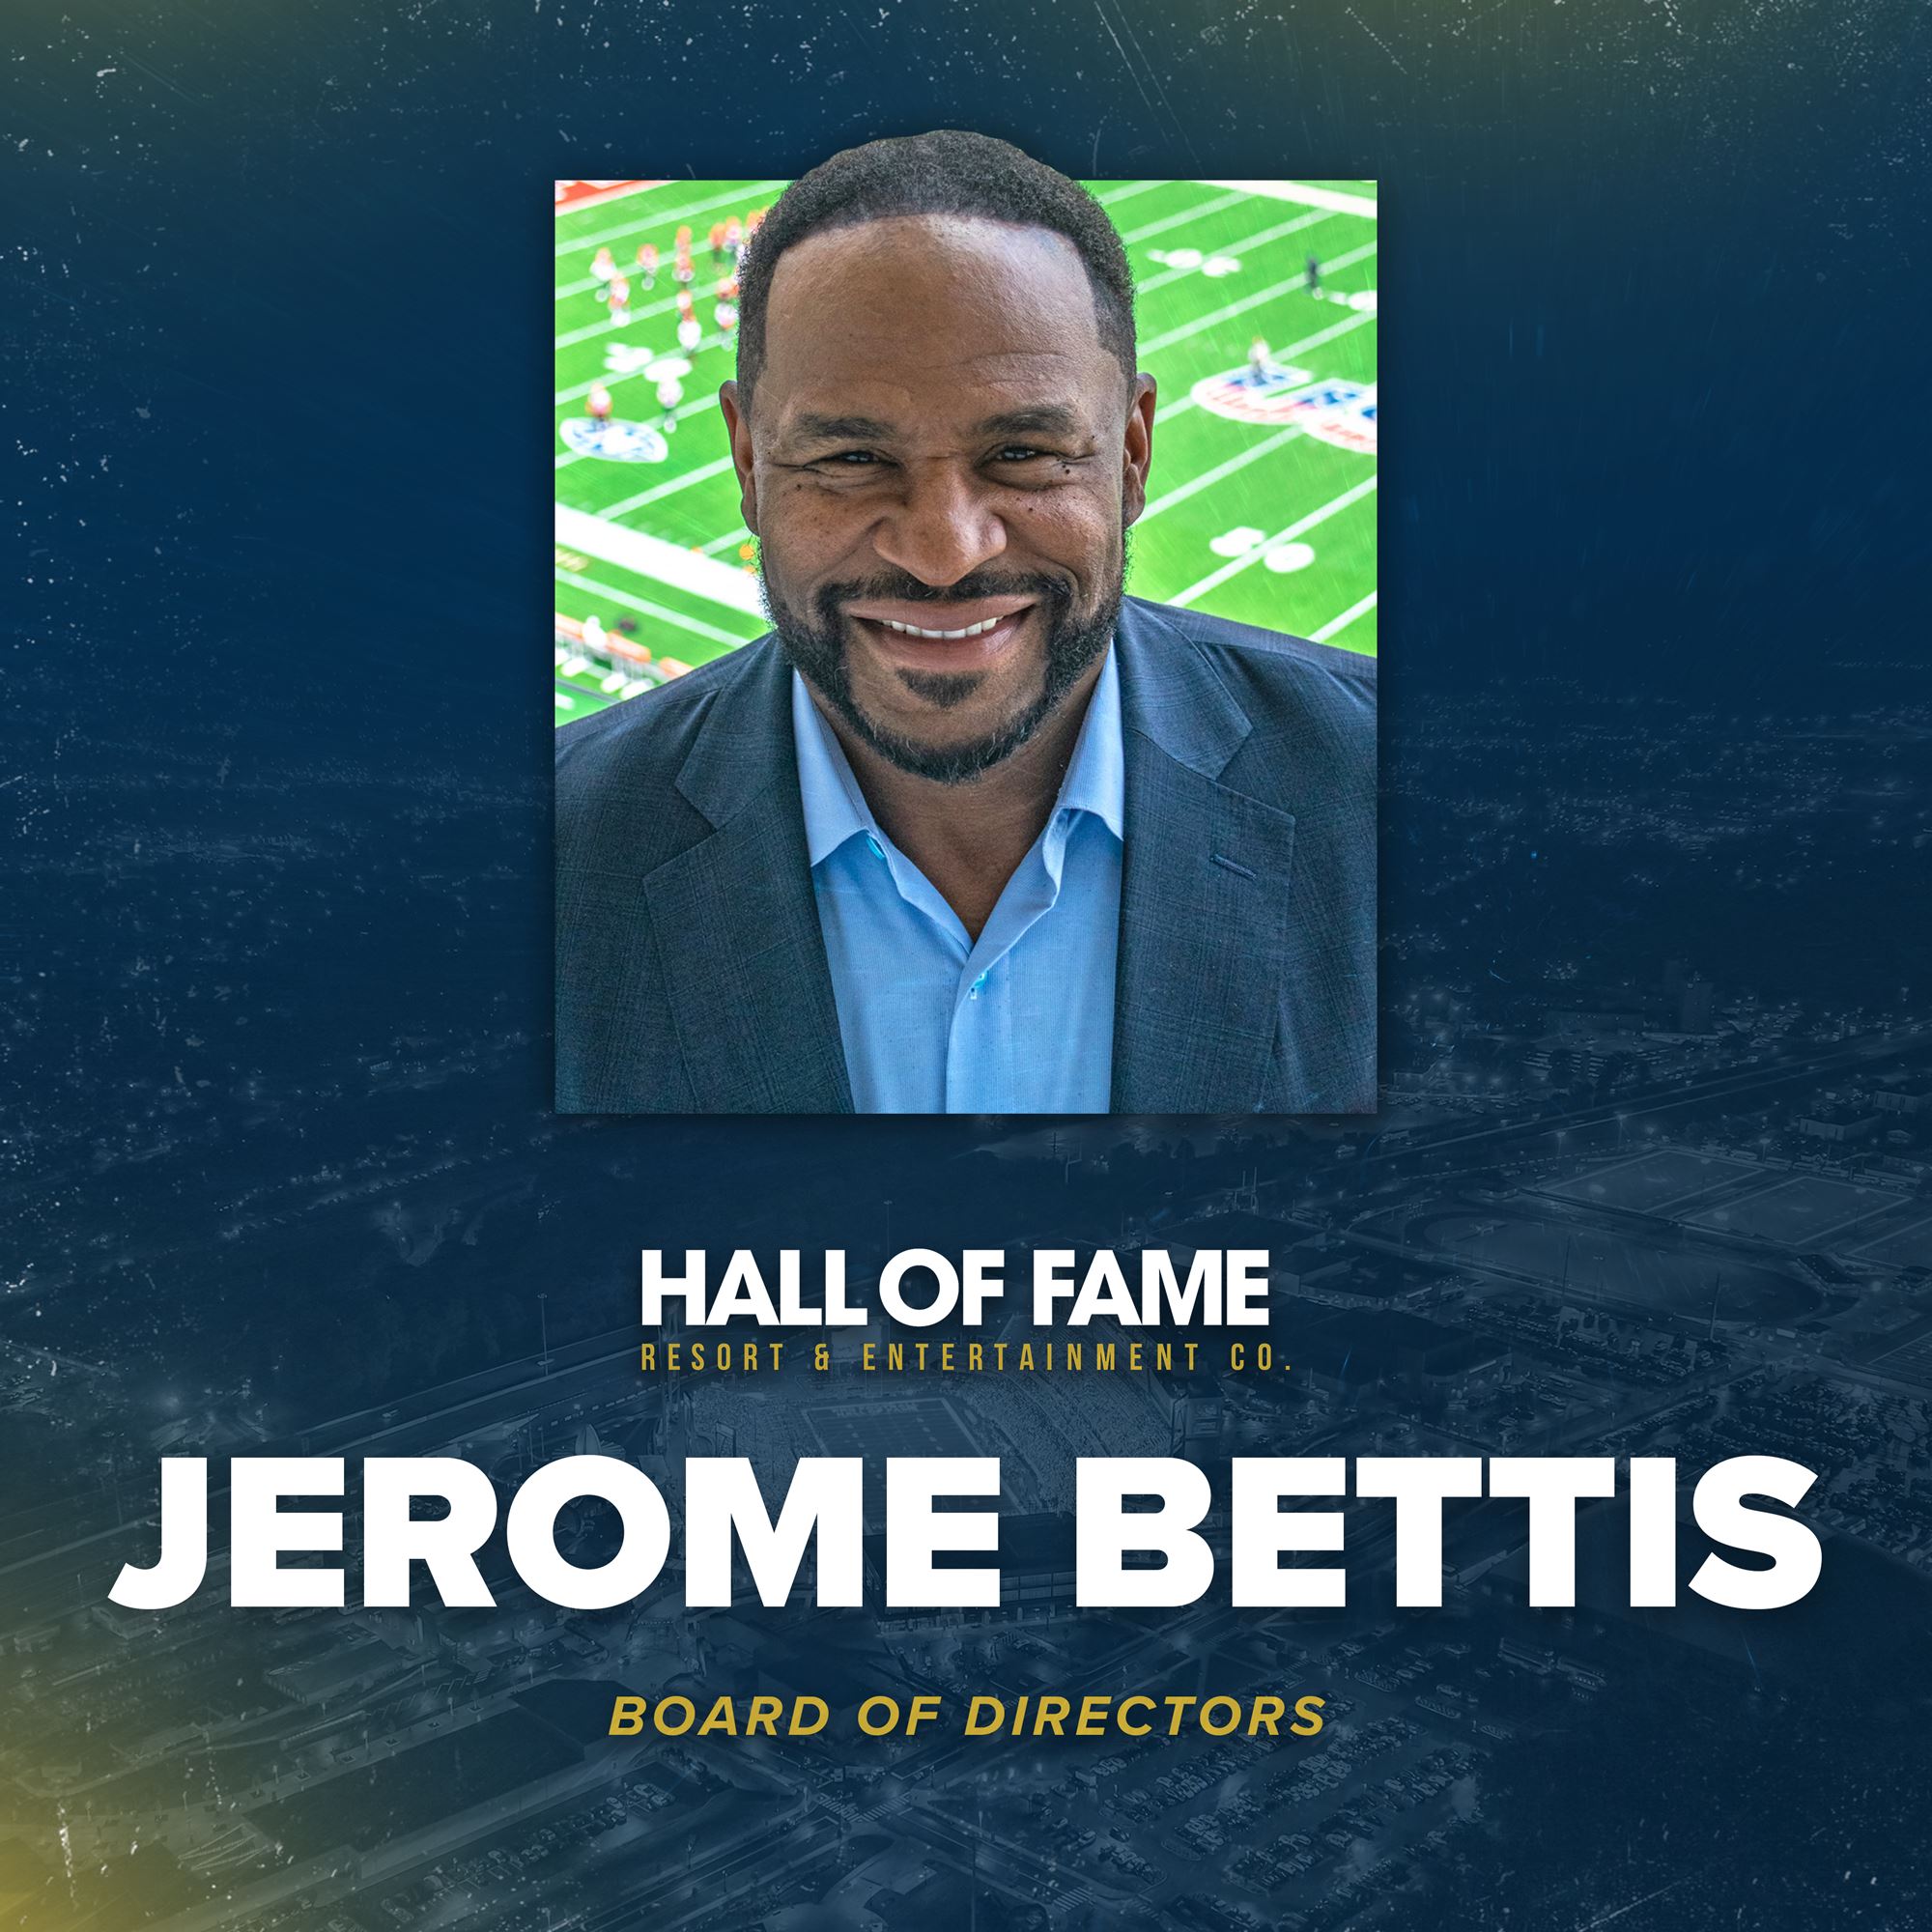 Hall of Fame Resort & Entertainment Company Appoints Hall of Famer Jerome Bettis to its Board of Directors